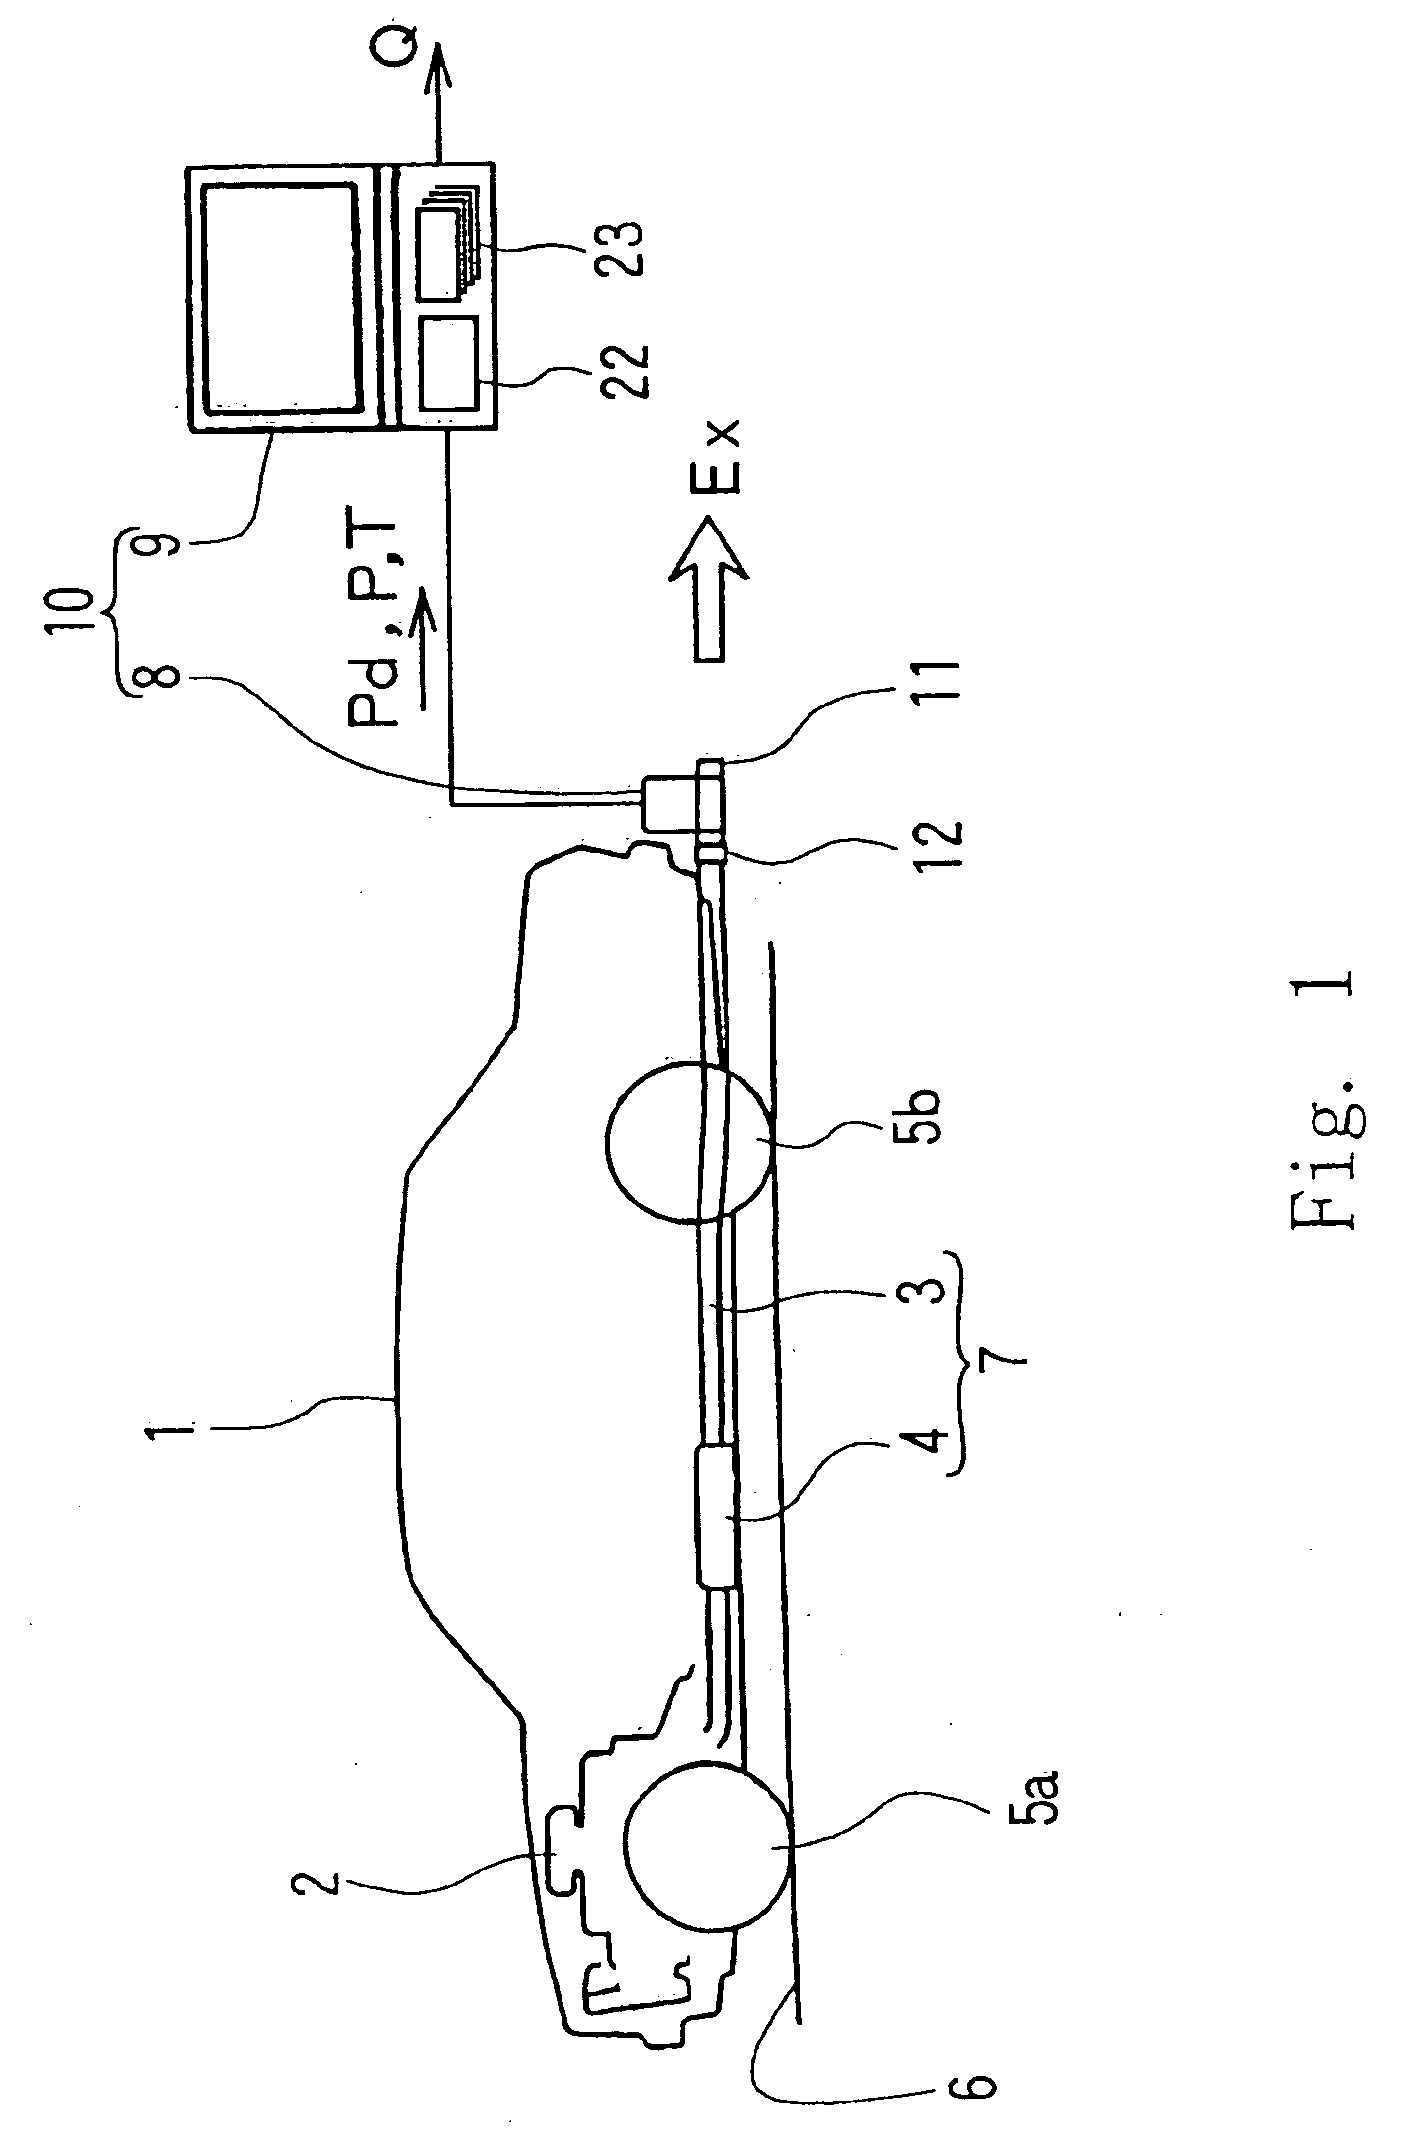 Method and apparatus for measuring exhaust gas flow rate and it's application system for analyzing the exhaust gases from an engine